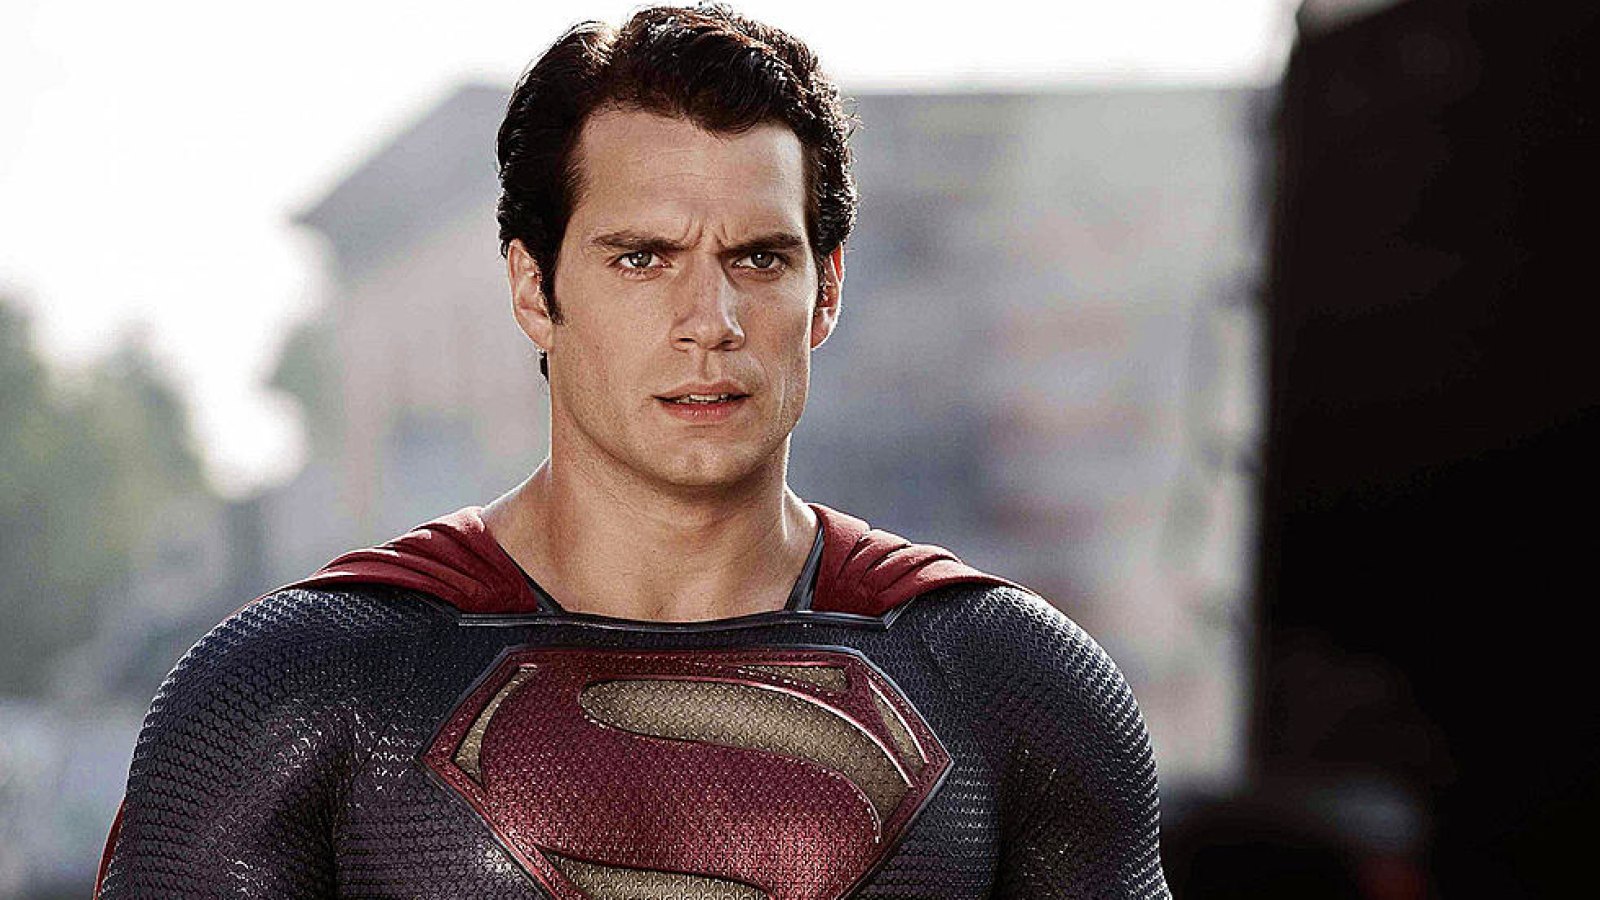 Henry Cavill as Superman out